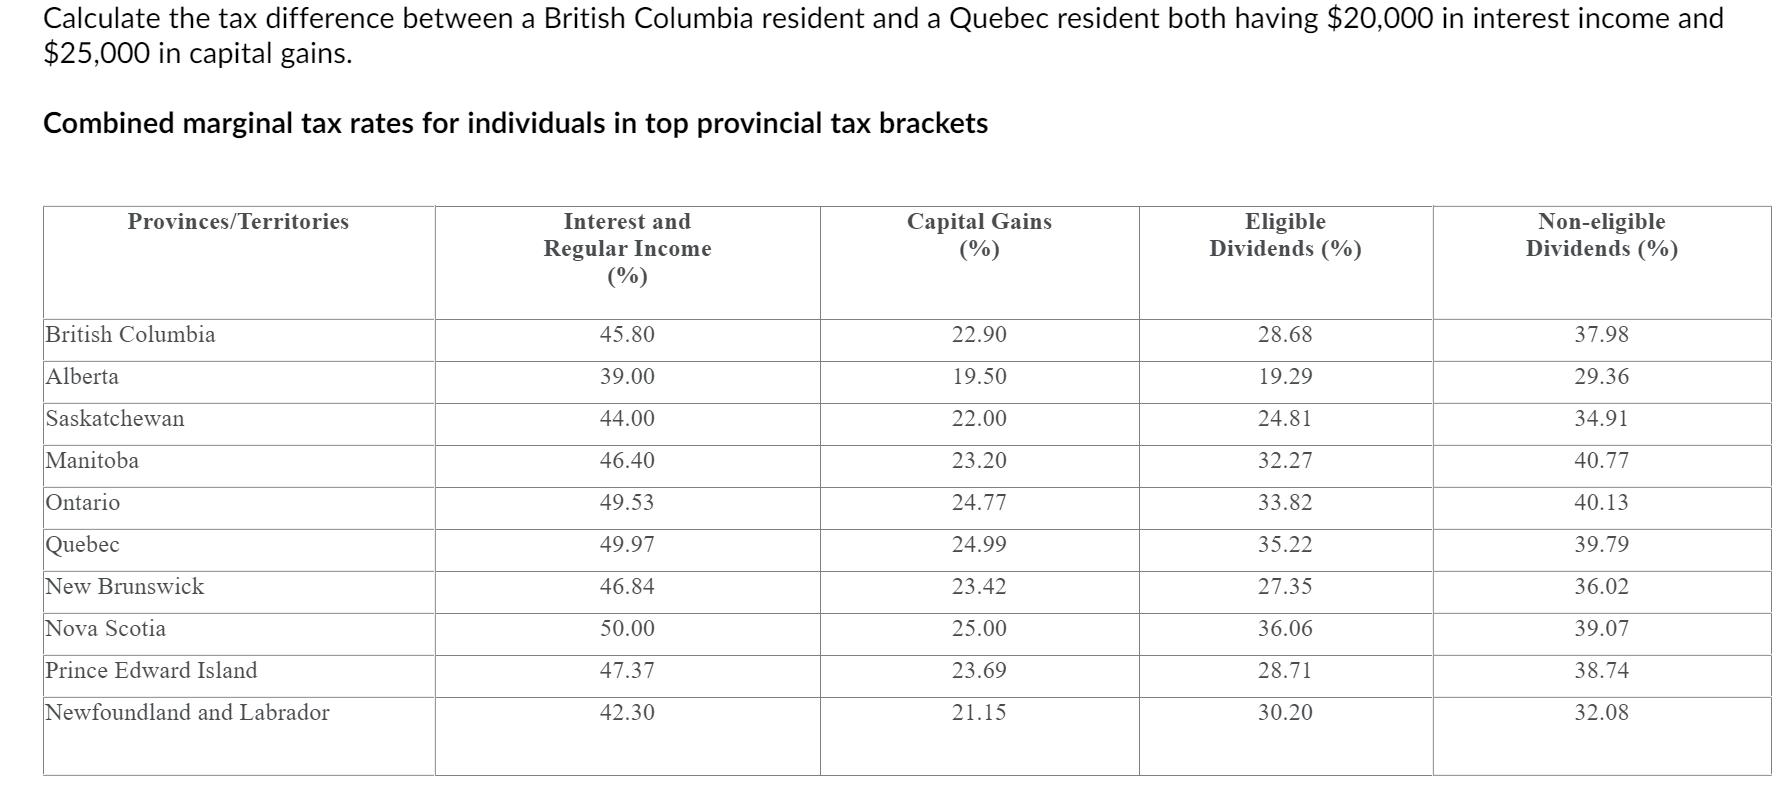 Calculate the tax difference between a British Columbia resident and a Quebec resident both having $20,000 in interest income